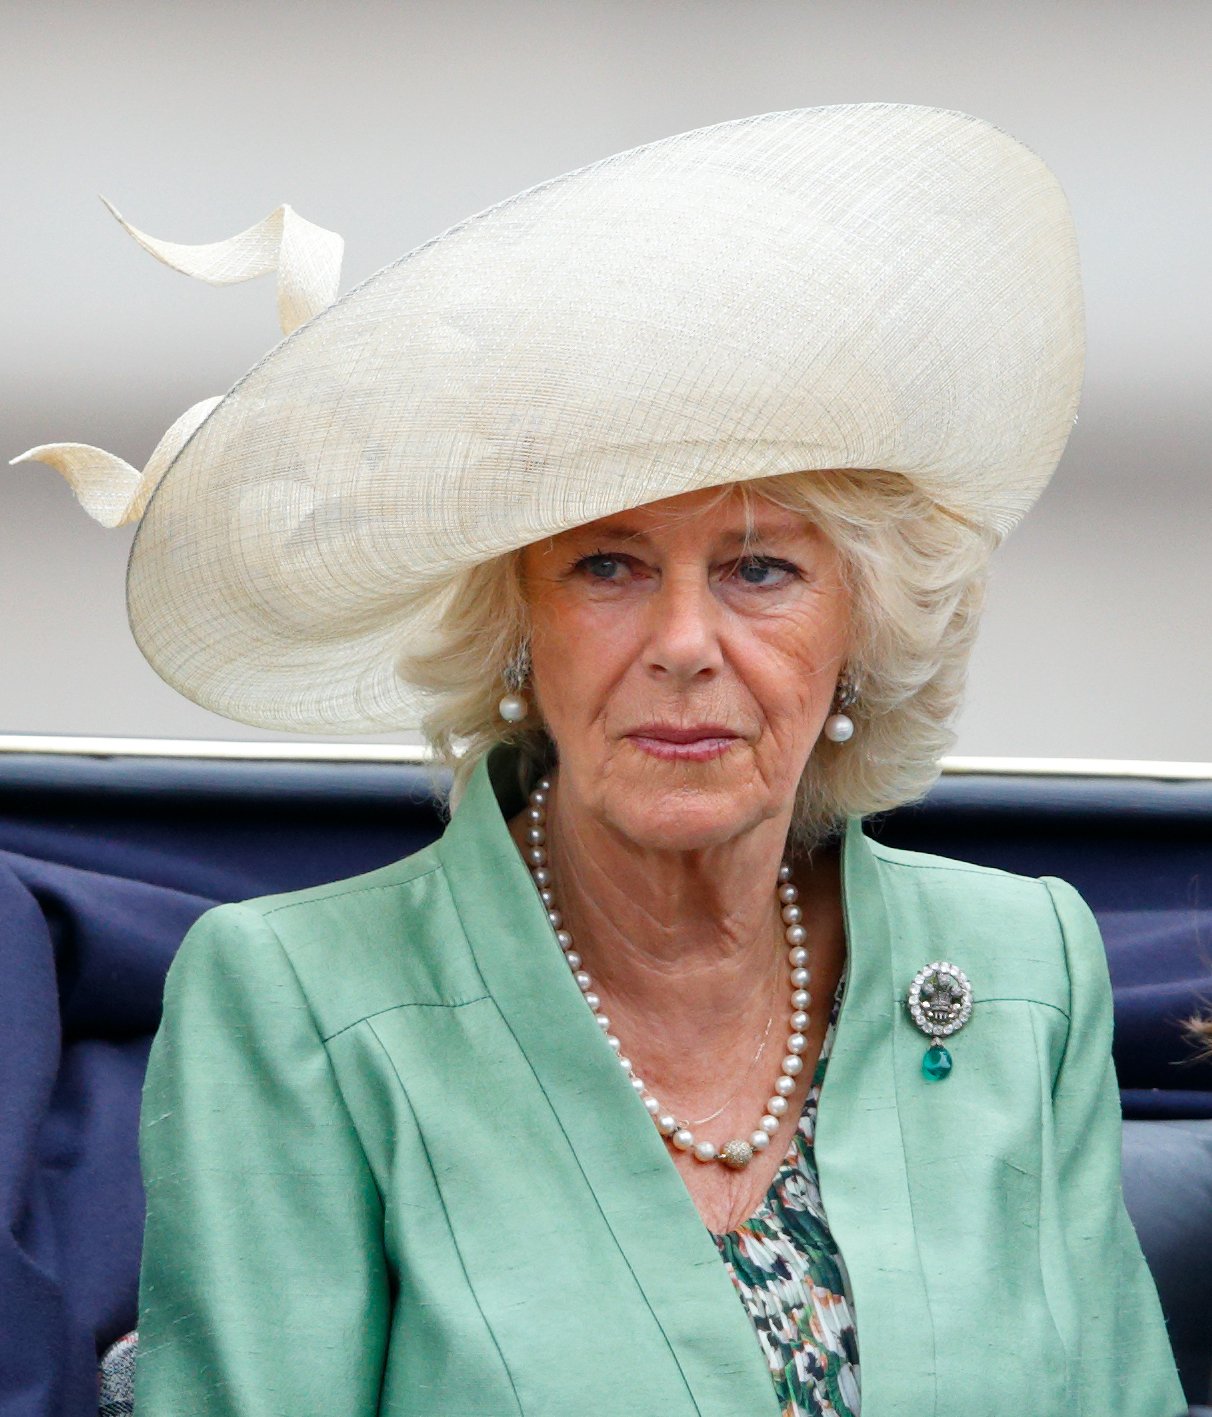 The Queen Consort, Camilla in London in 2015. | Source: Getty Images 